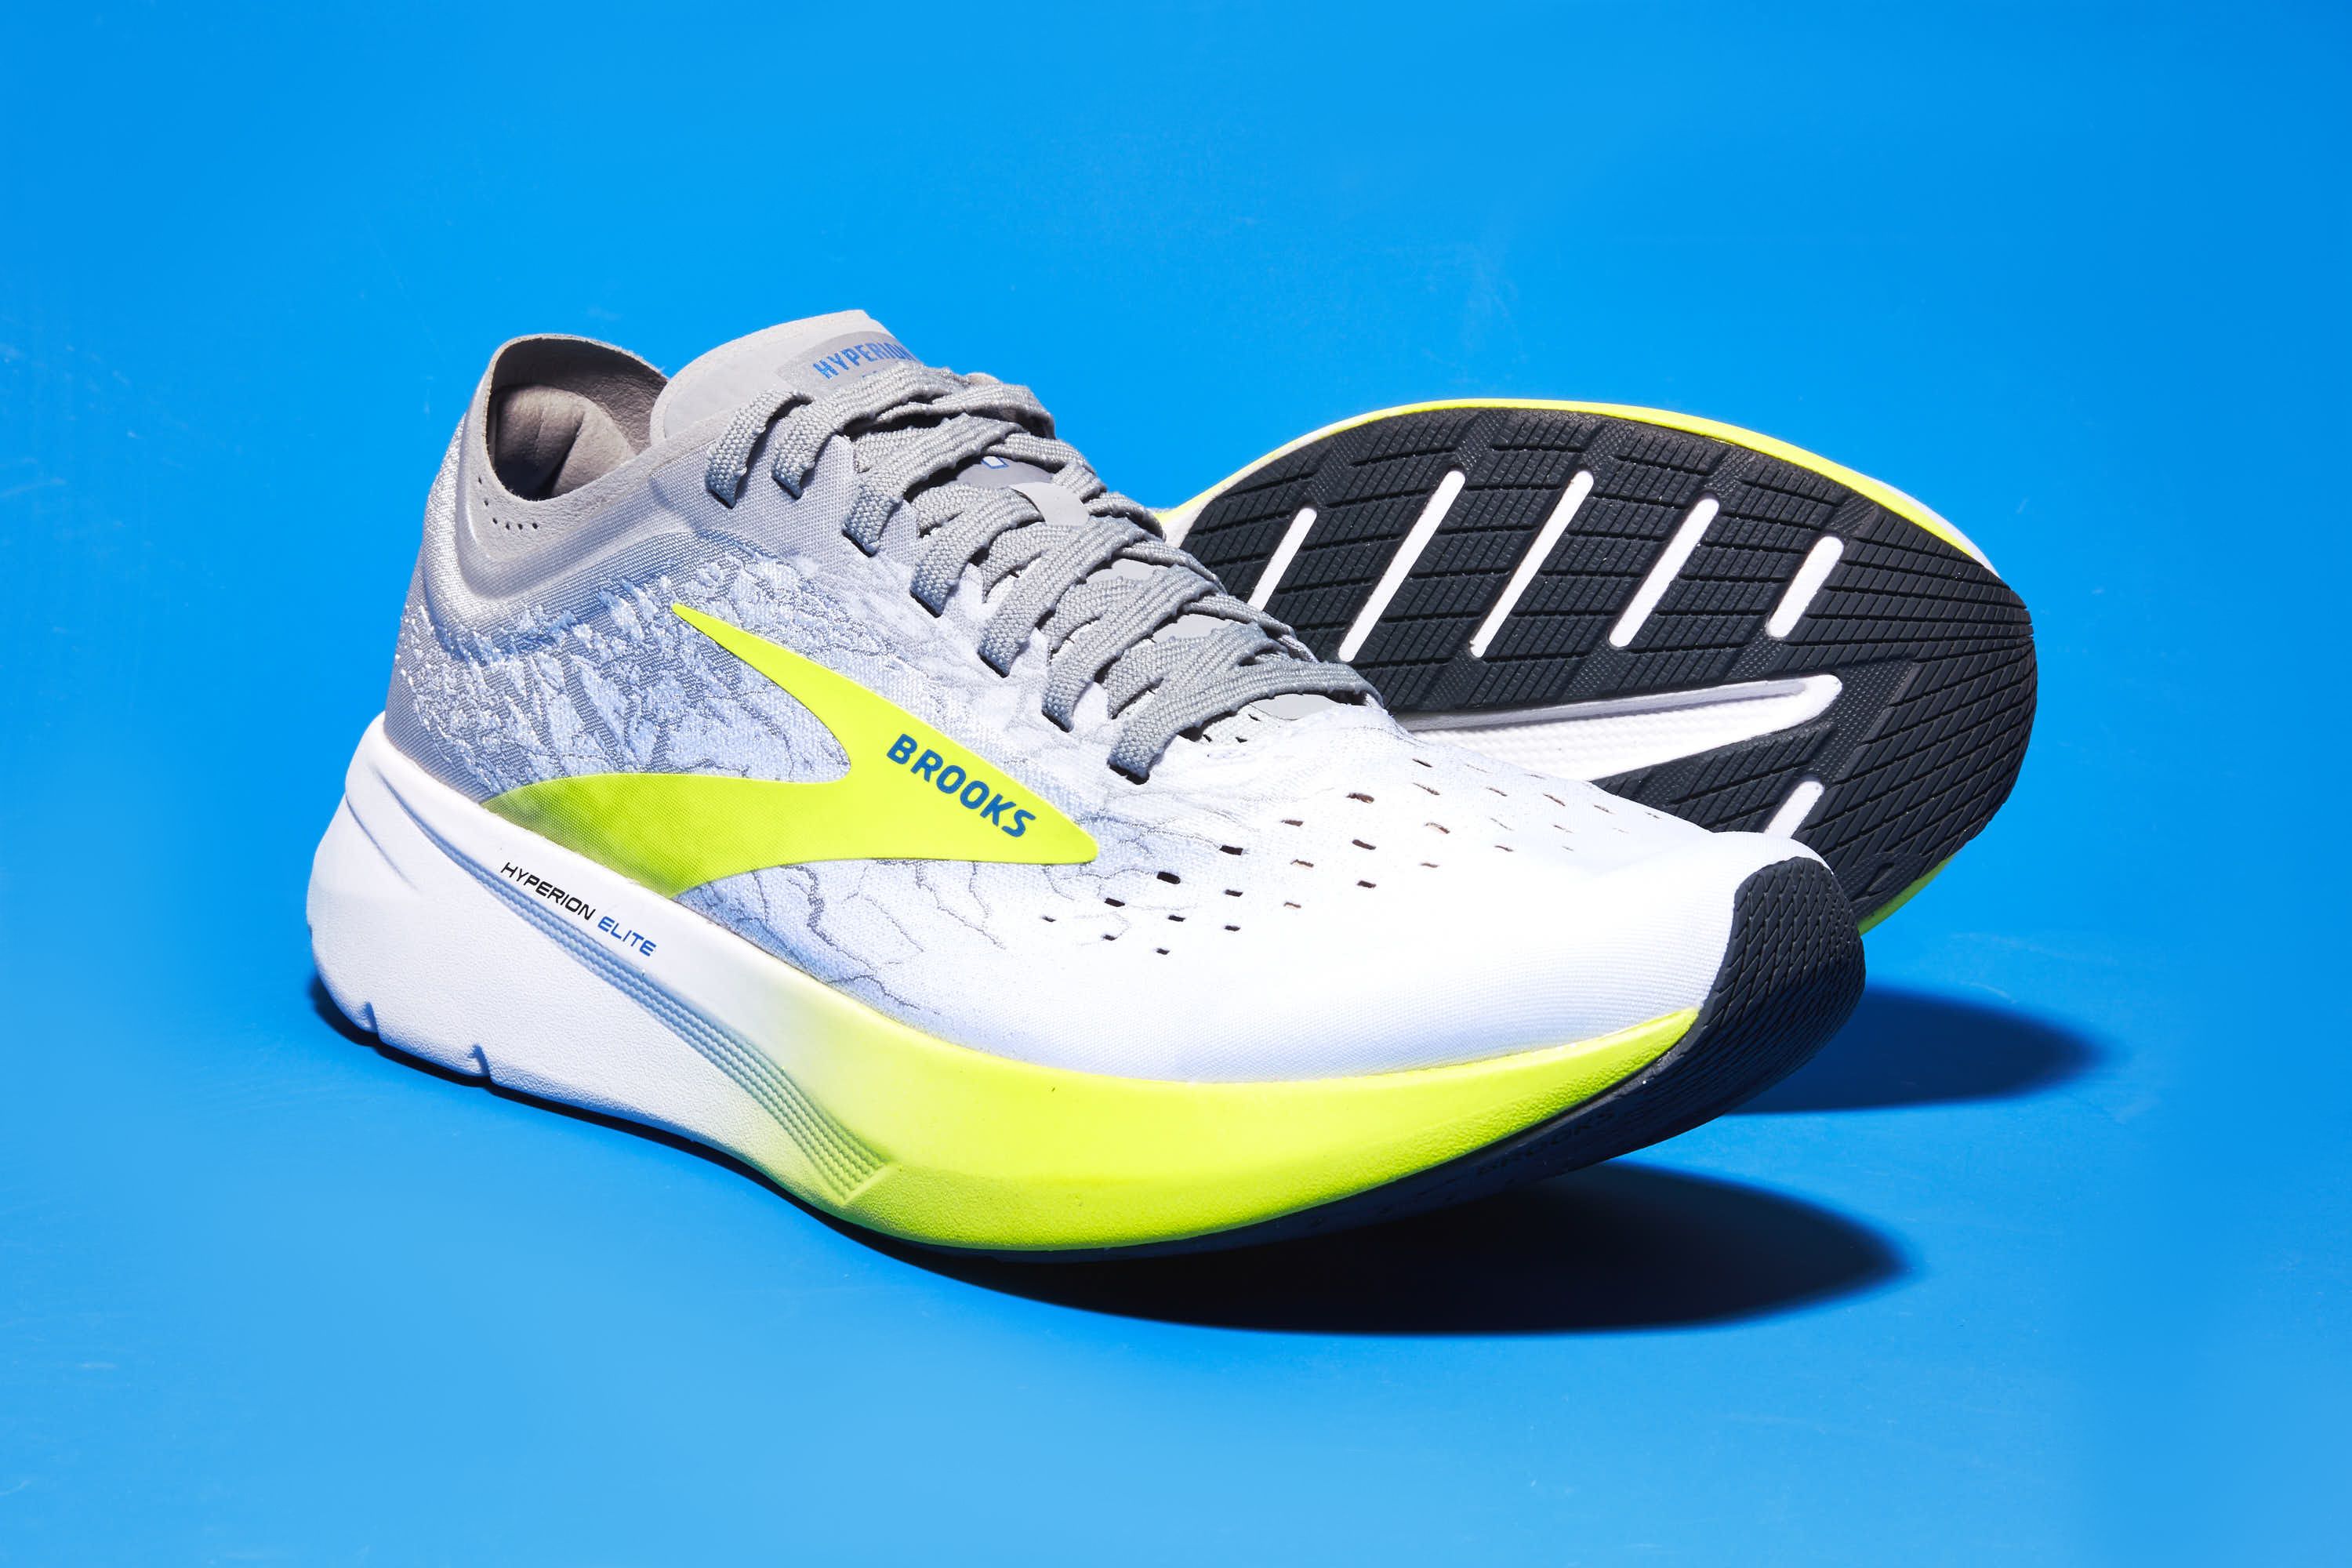 The Hyperion Elite 2 is Brooks answer to